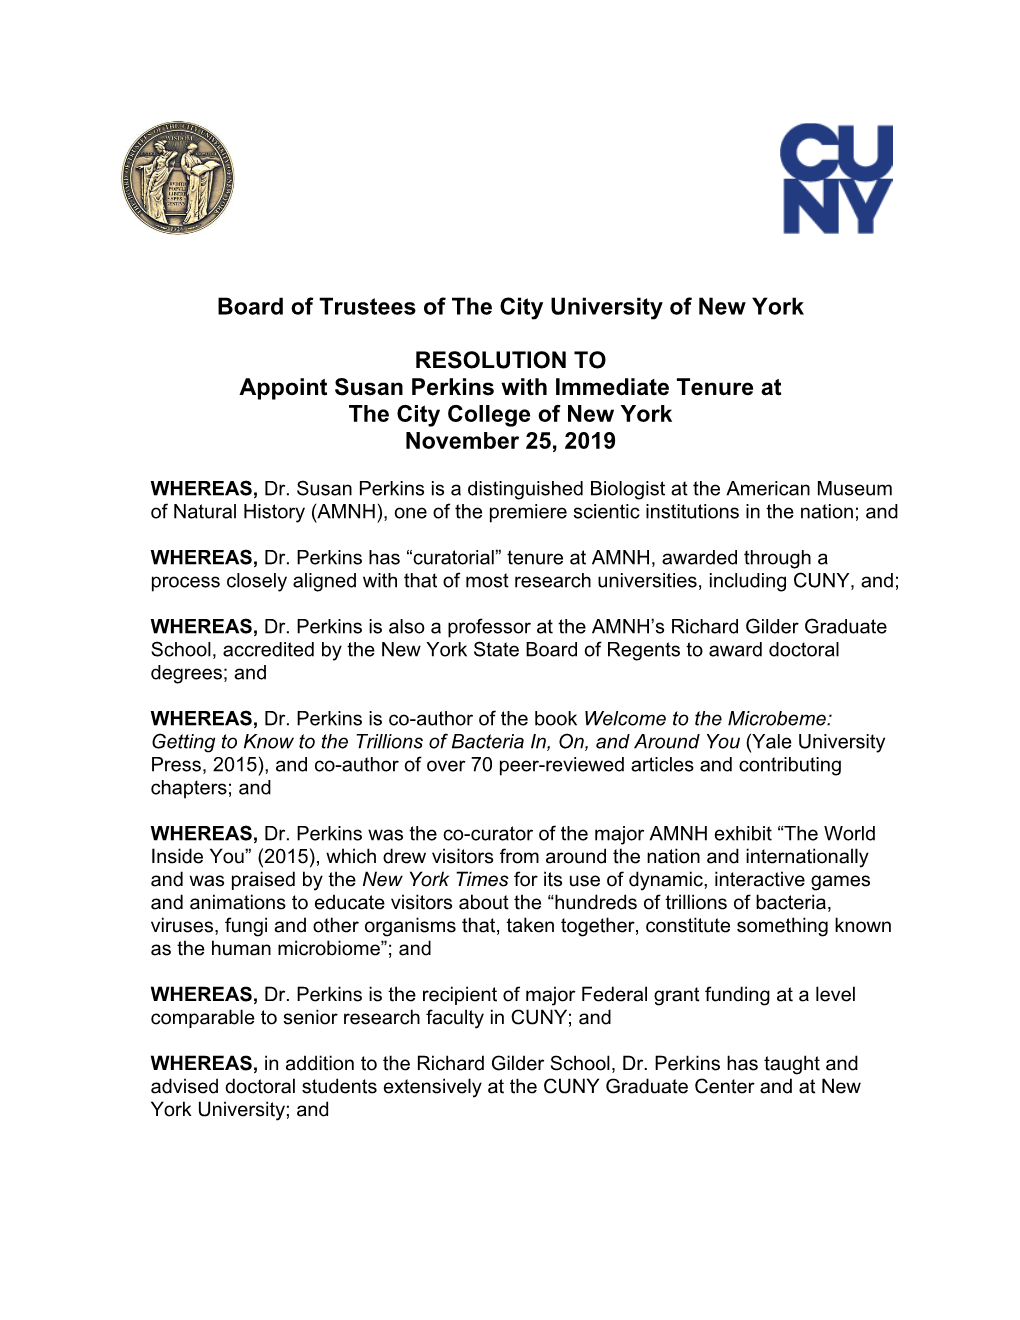 Board of Trustees of the City University of New York RESOLUTION to Appoint Susan Perkins with Immediate Tenure at the City Coll